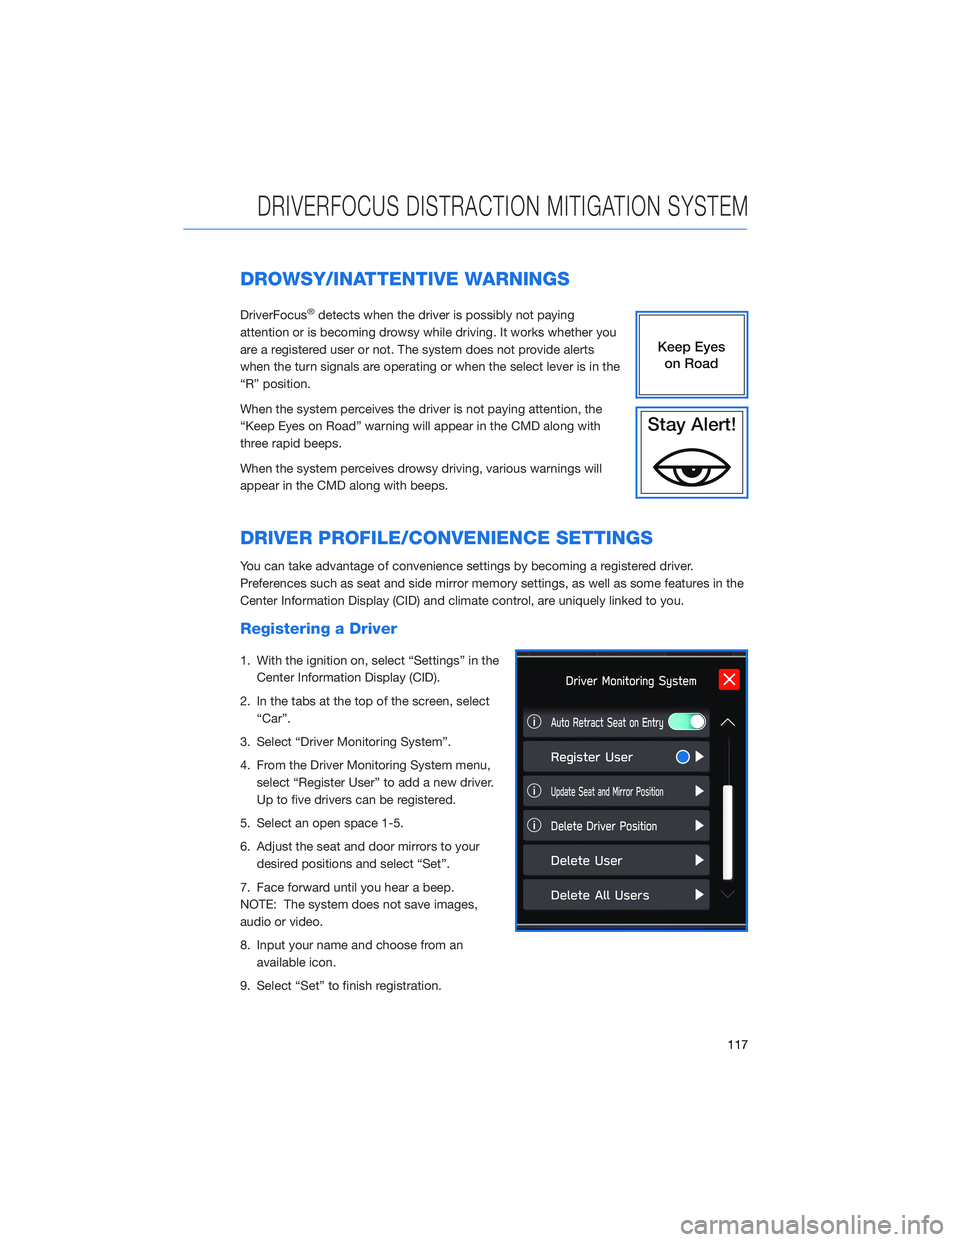 SUBARU OUTBACK 2021  Getting Started Guide DROWSY/INATTENTIVE WARNINGS
DriverFocus®detects when the driver is possibly not paying
attention or is becoming drowsy while driving. It works whether you
are a registered user or not. The system doe